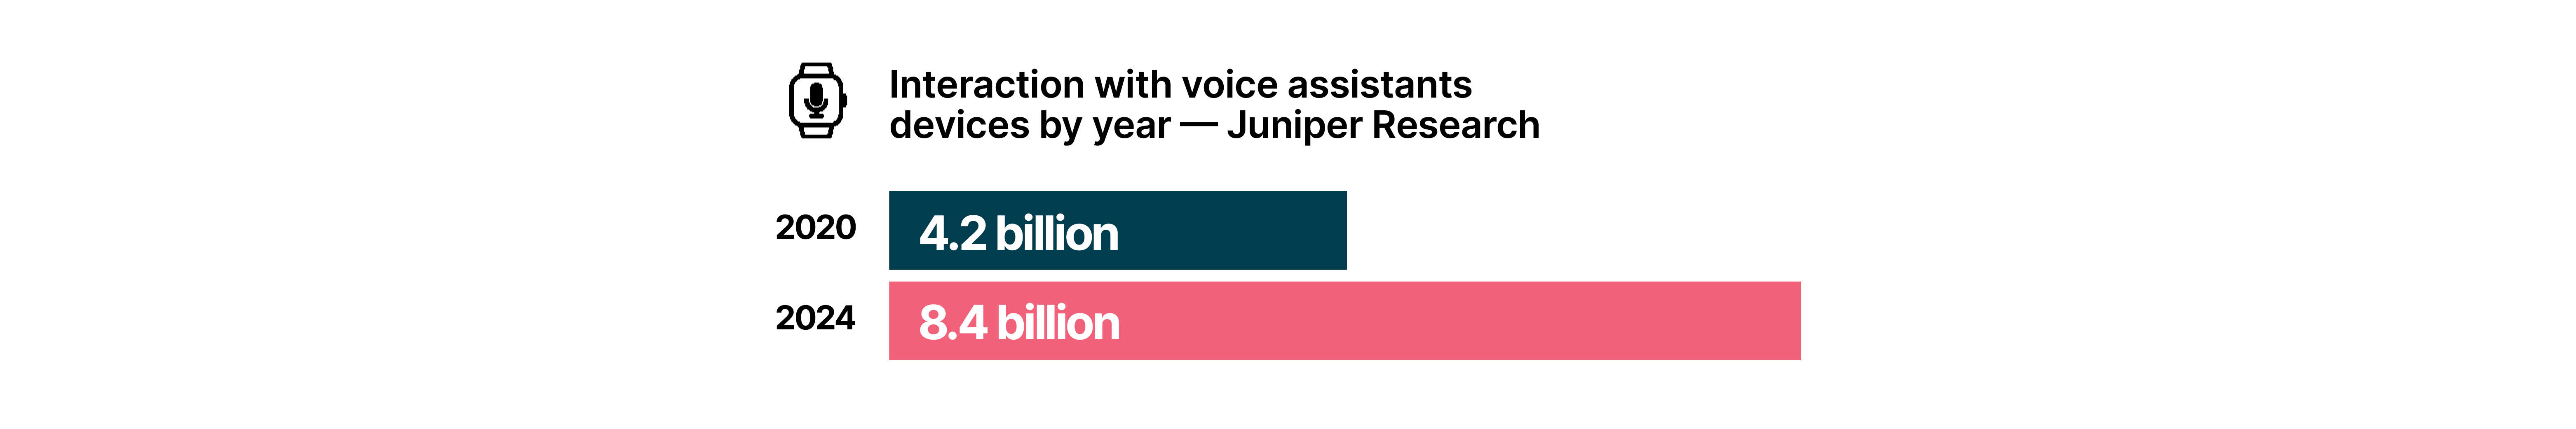 Interaction with voice assistants devices by year - Juniper Research. The graph shows that in 2020 there were 4.2 billion interactions and in 2024 there were 8.4 billion interactions.